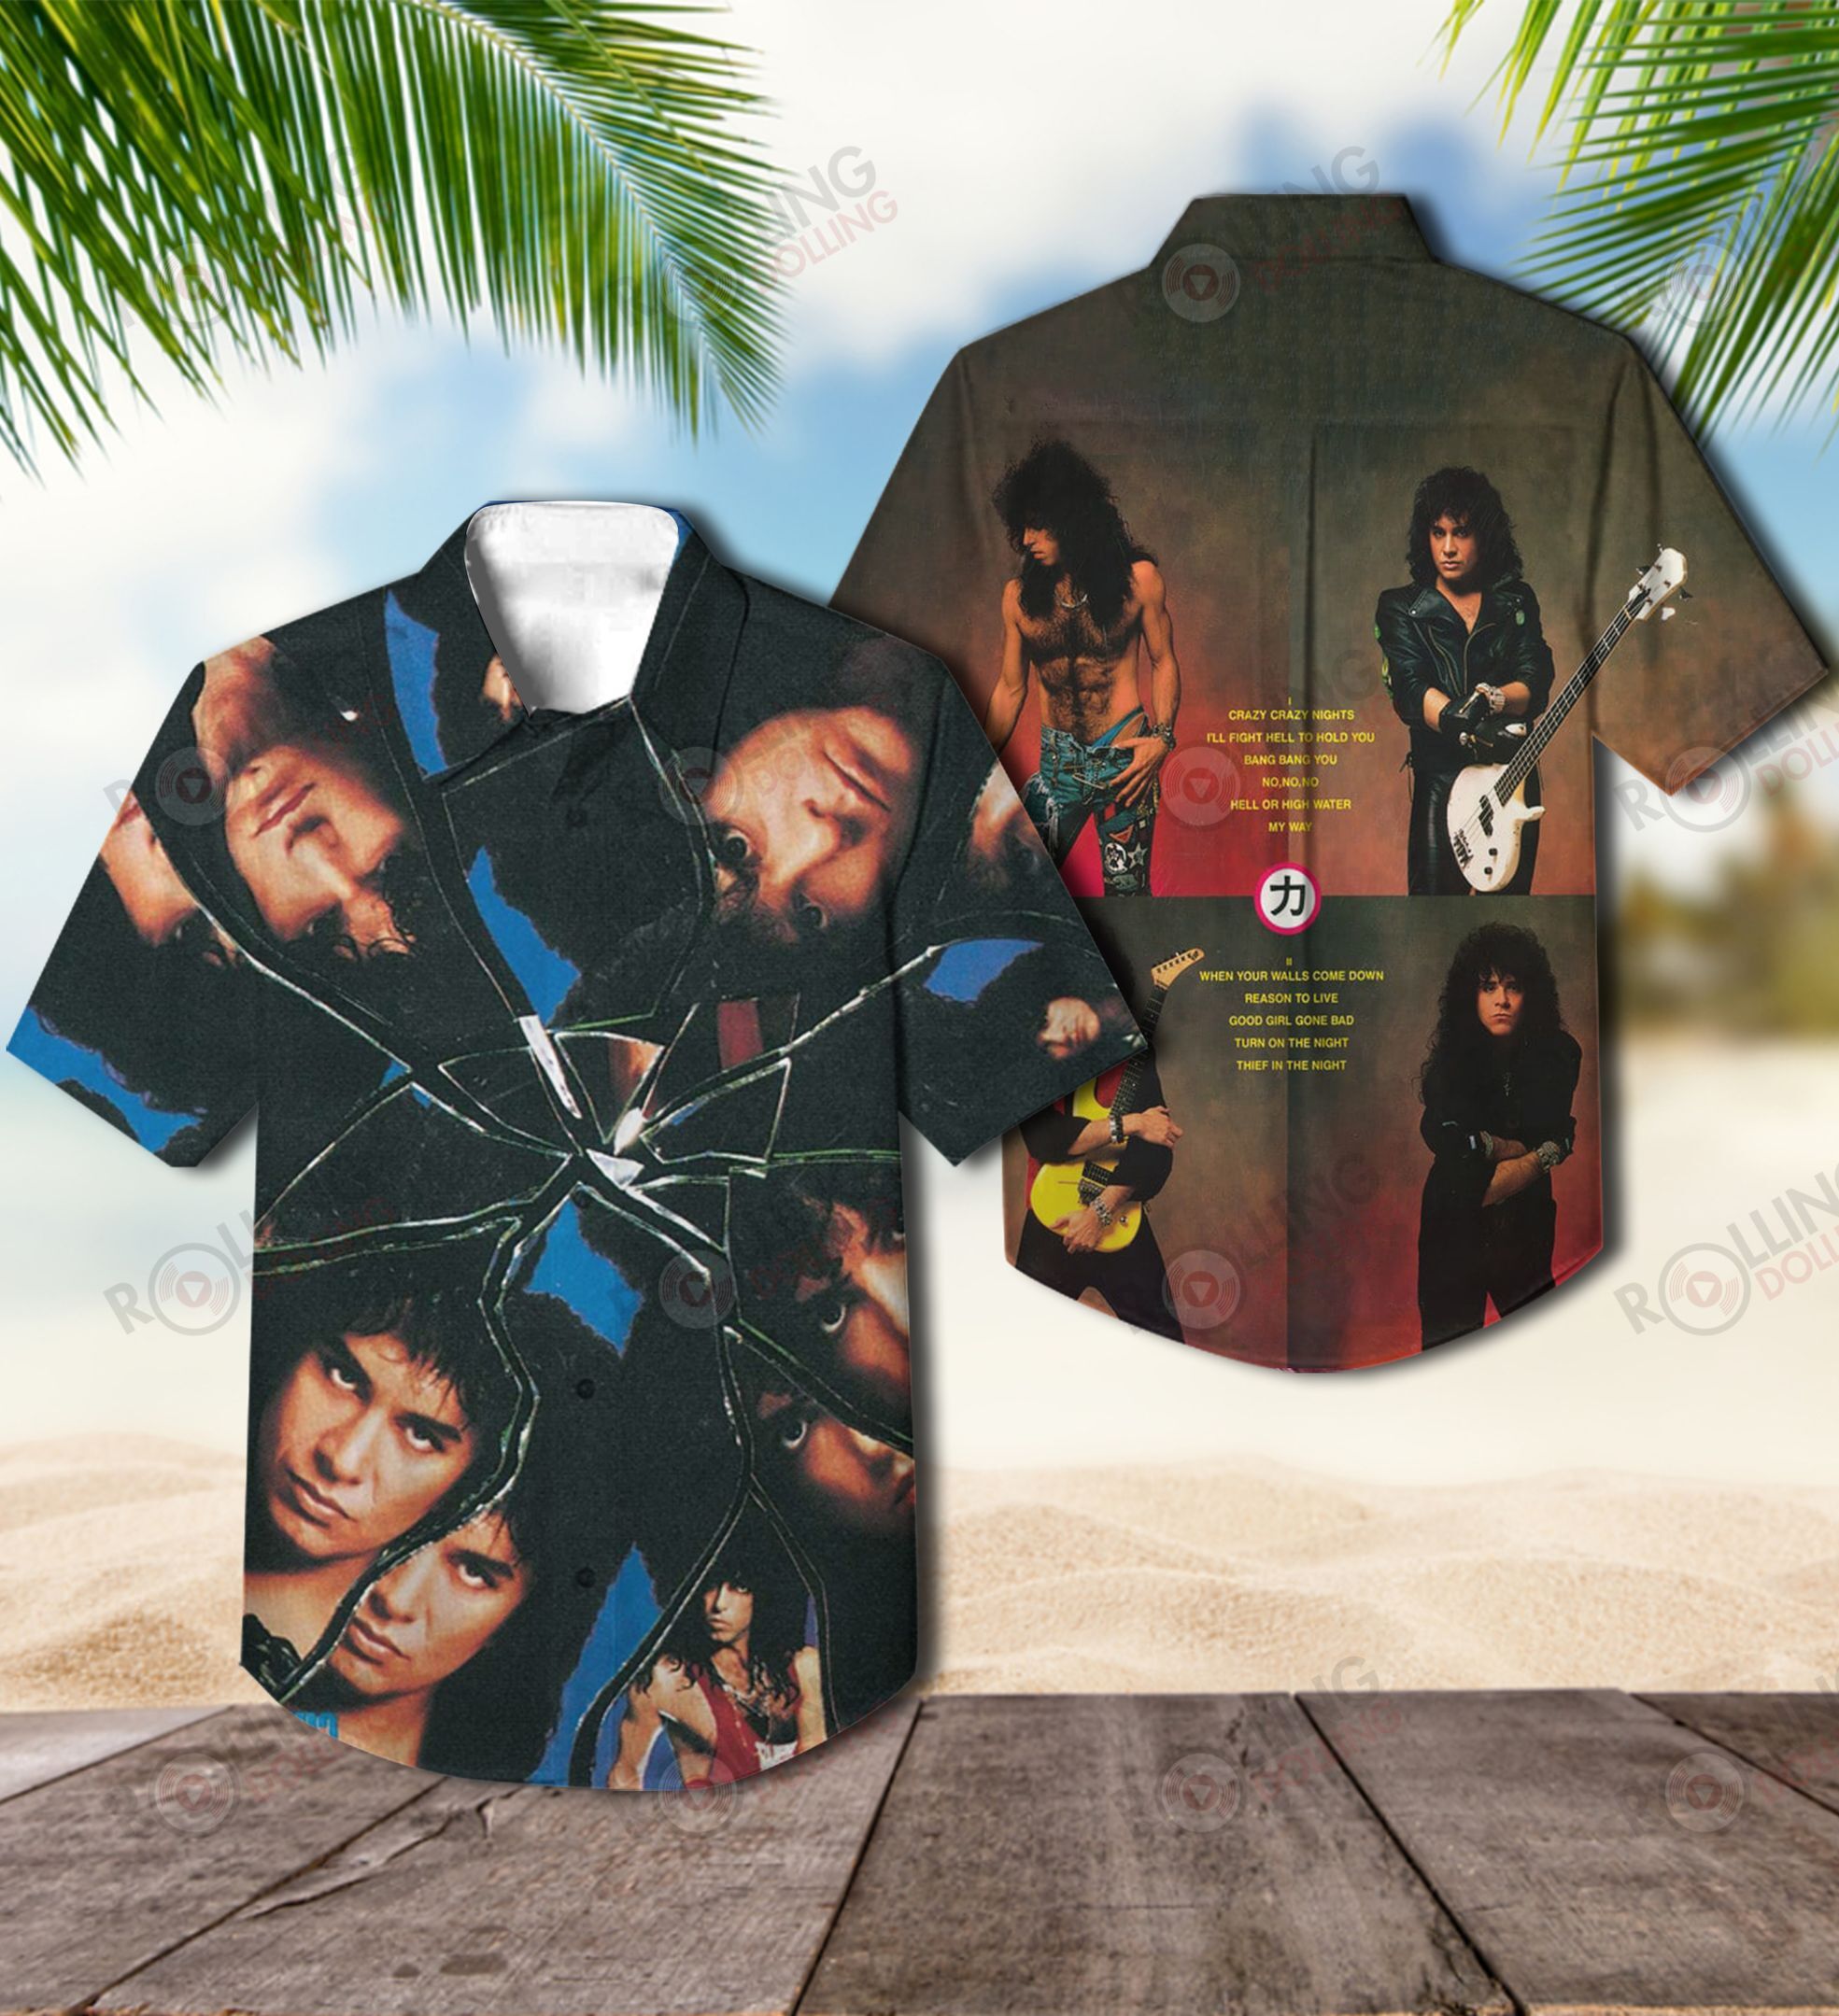 For summer, consider wearing This Amazing Hawaiian Shirt shirt in our store 166